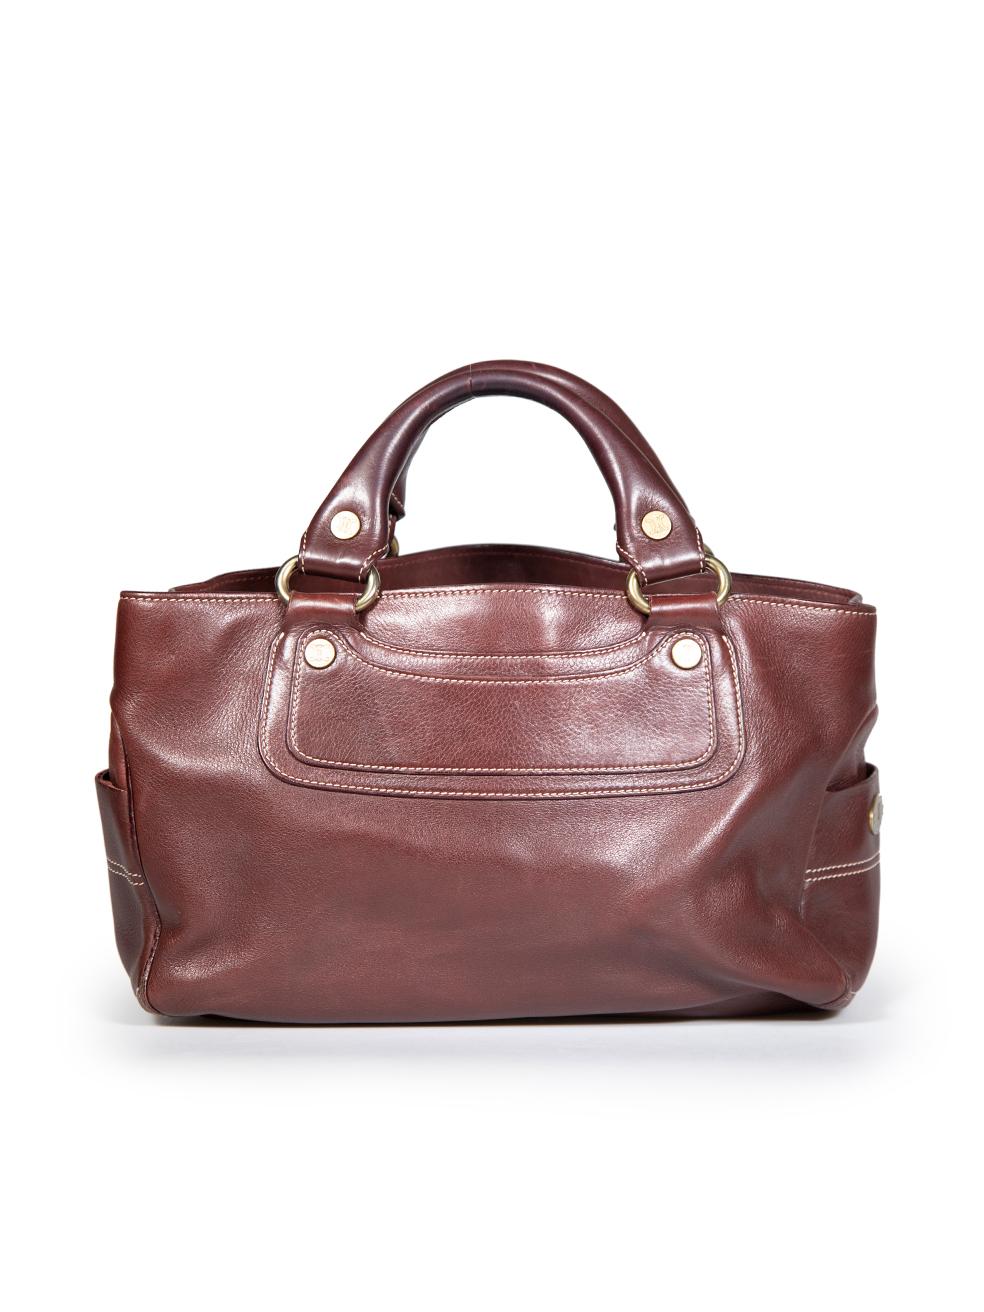 Céline Brown Leather Boogie Handbag In Good Condition For Sale In London, GB